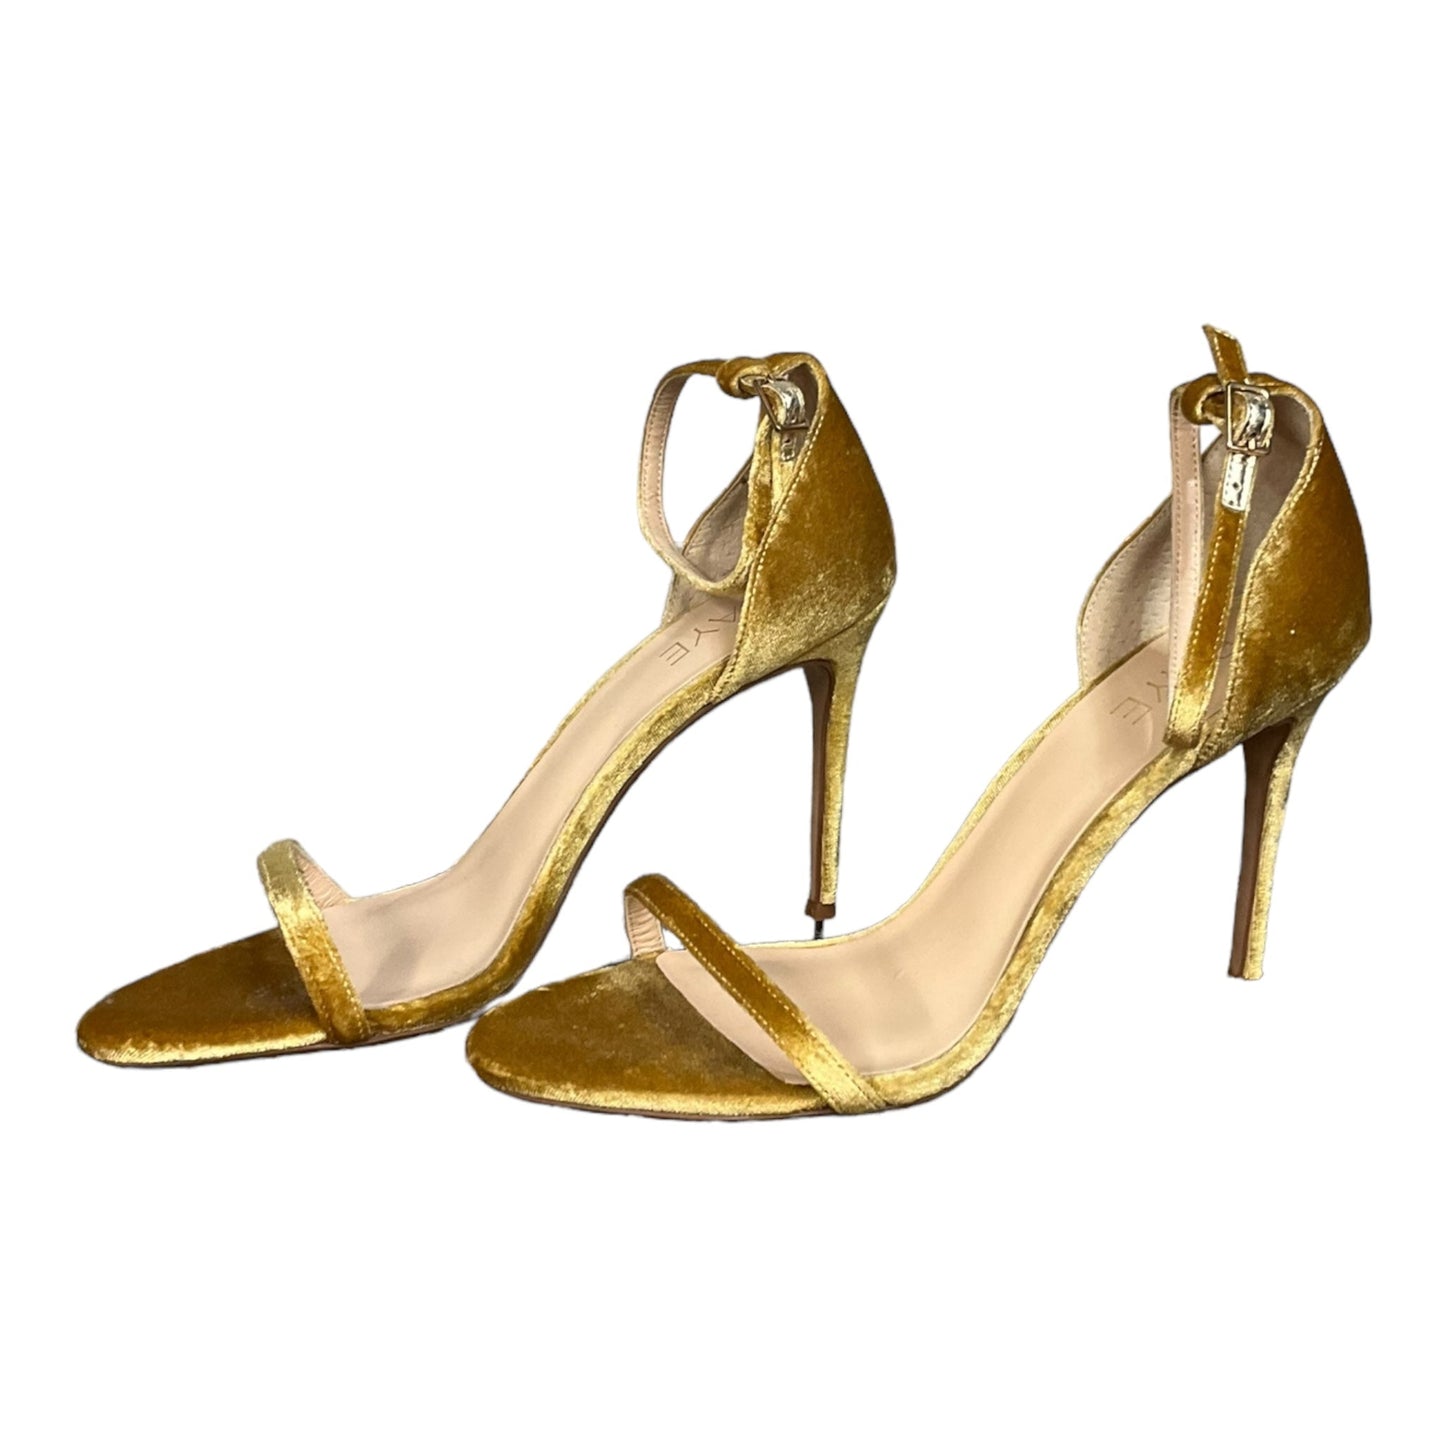 Gold Shoes Heels Stiletto Clothes Mentor, Size 8.5